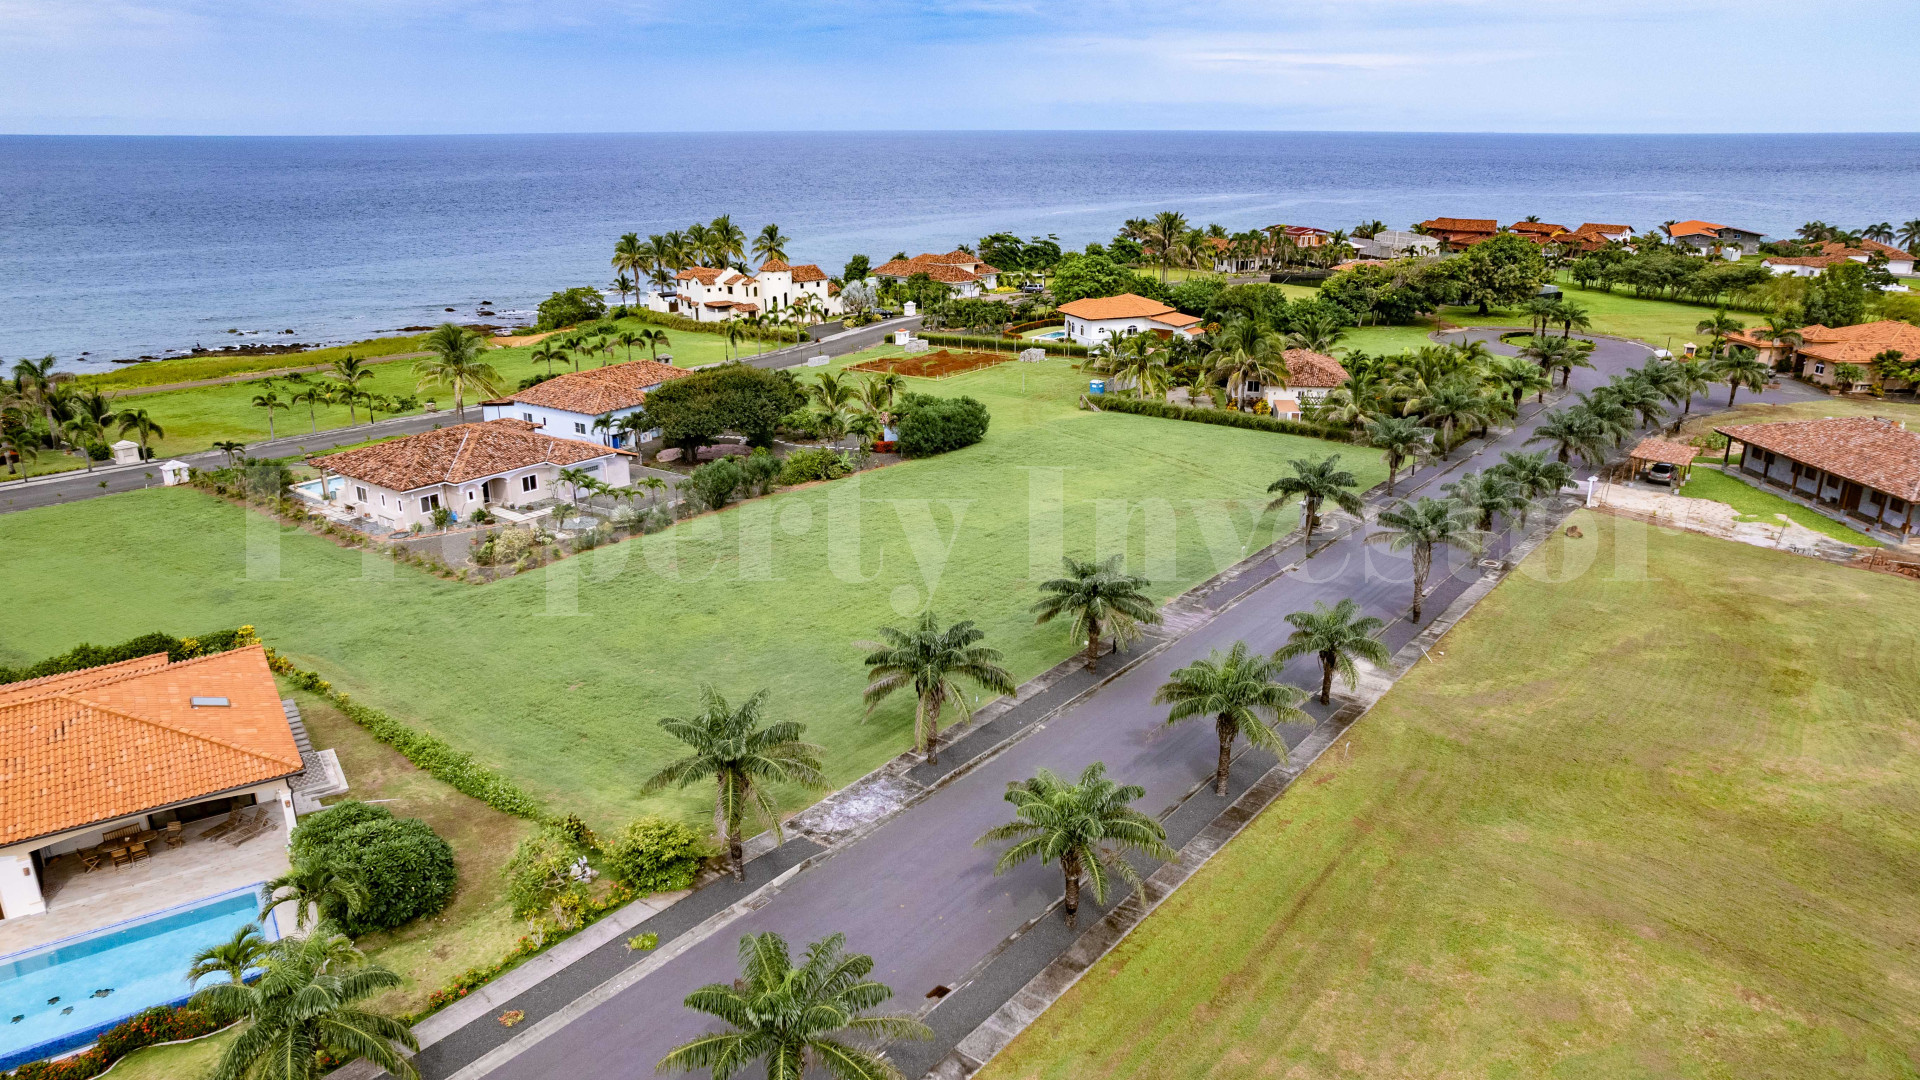 1,112-1,362 m² Ocean View Gated Community Residential Lots for Sale in Pedasi, Panama